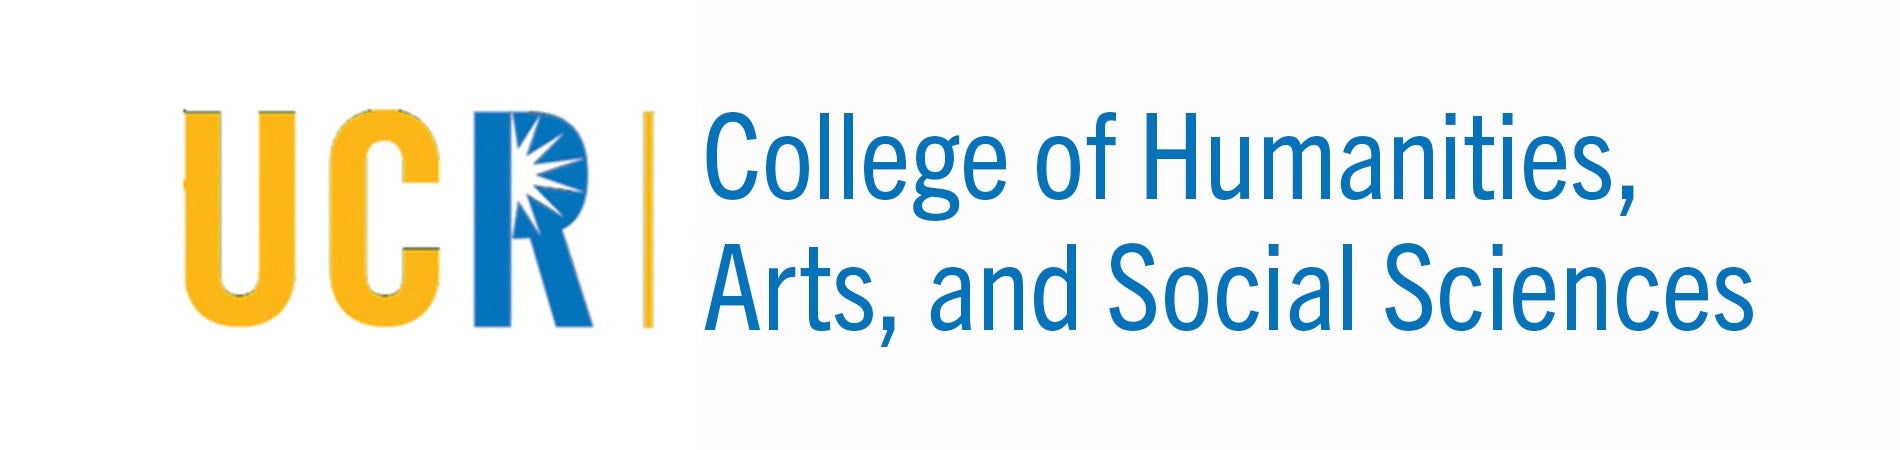 College of Humanities, Arts, and Social Sciences